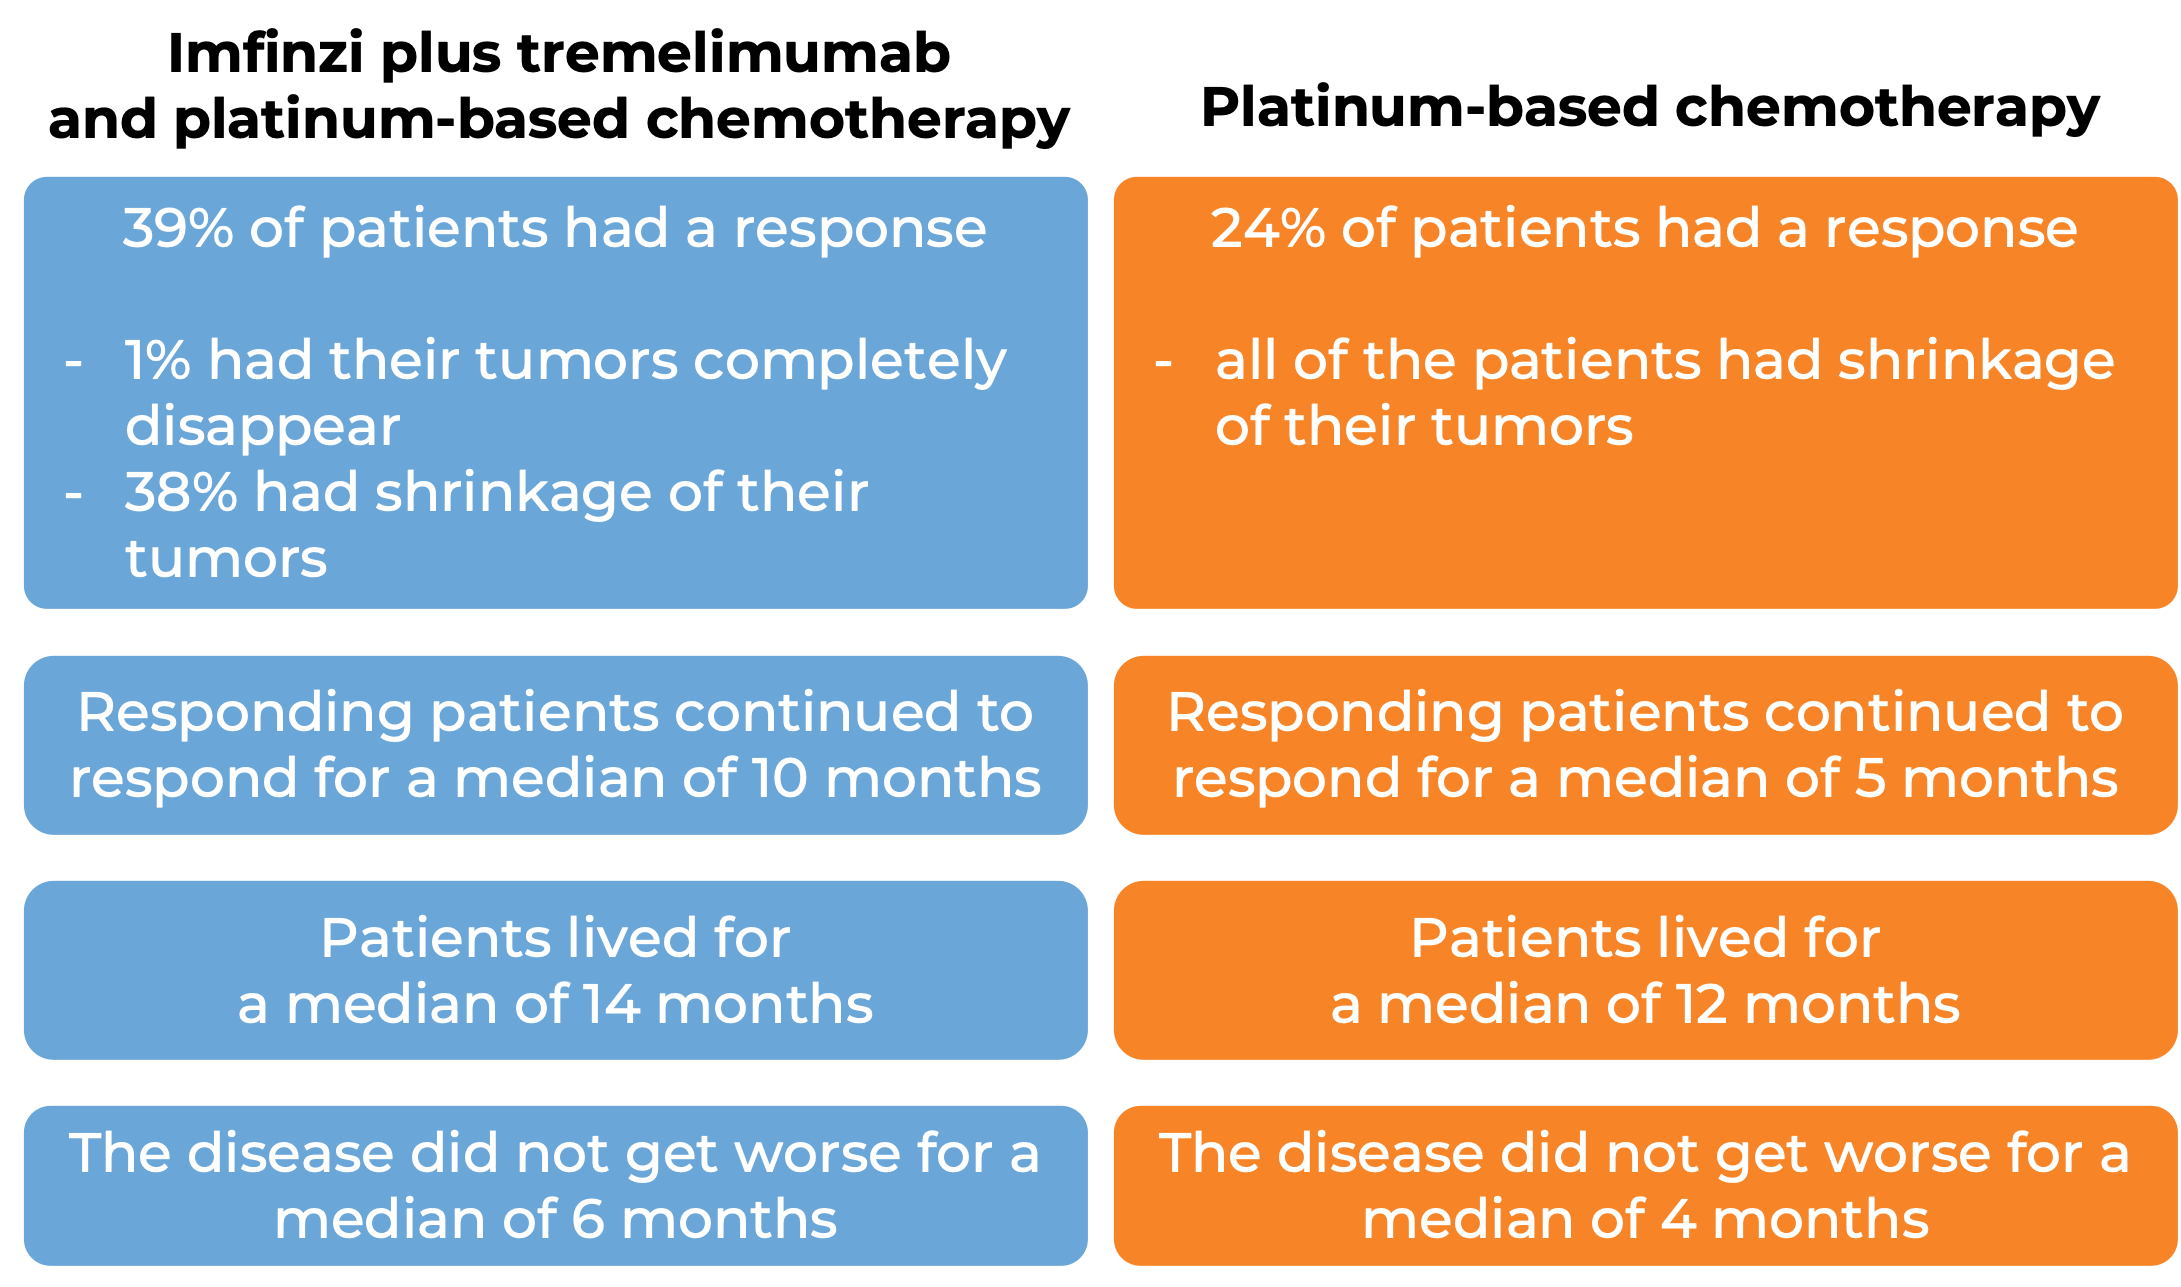 Results after treatment with Imfinzi and tremelimumab and chemo vs chemo alone (diagram)